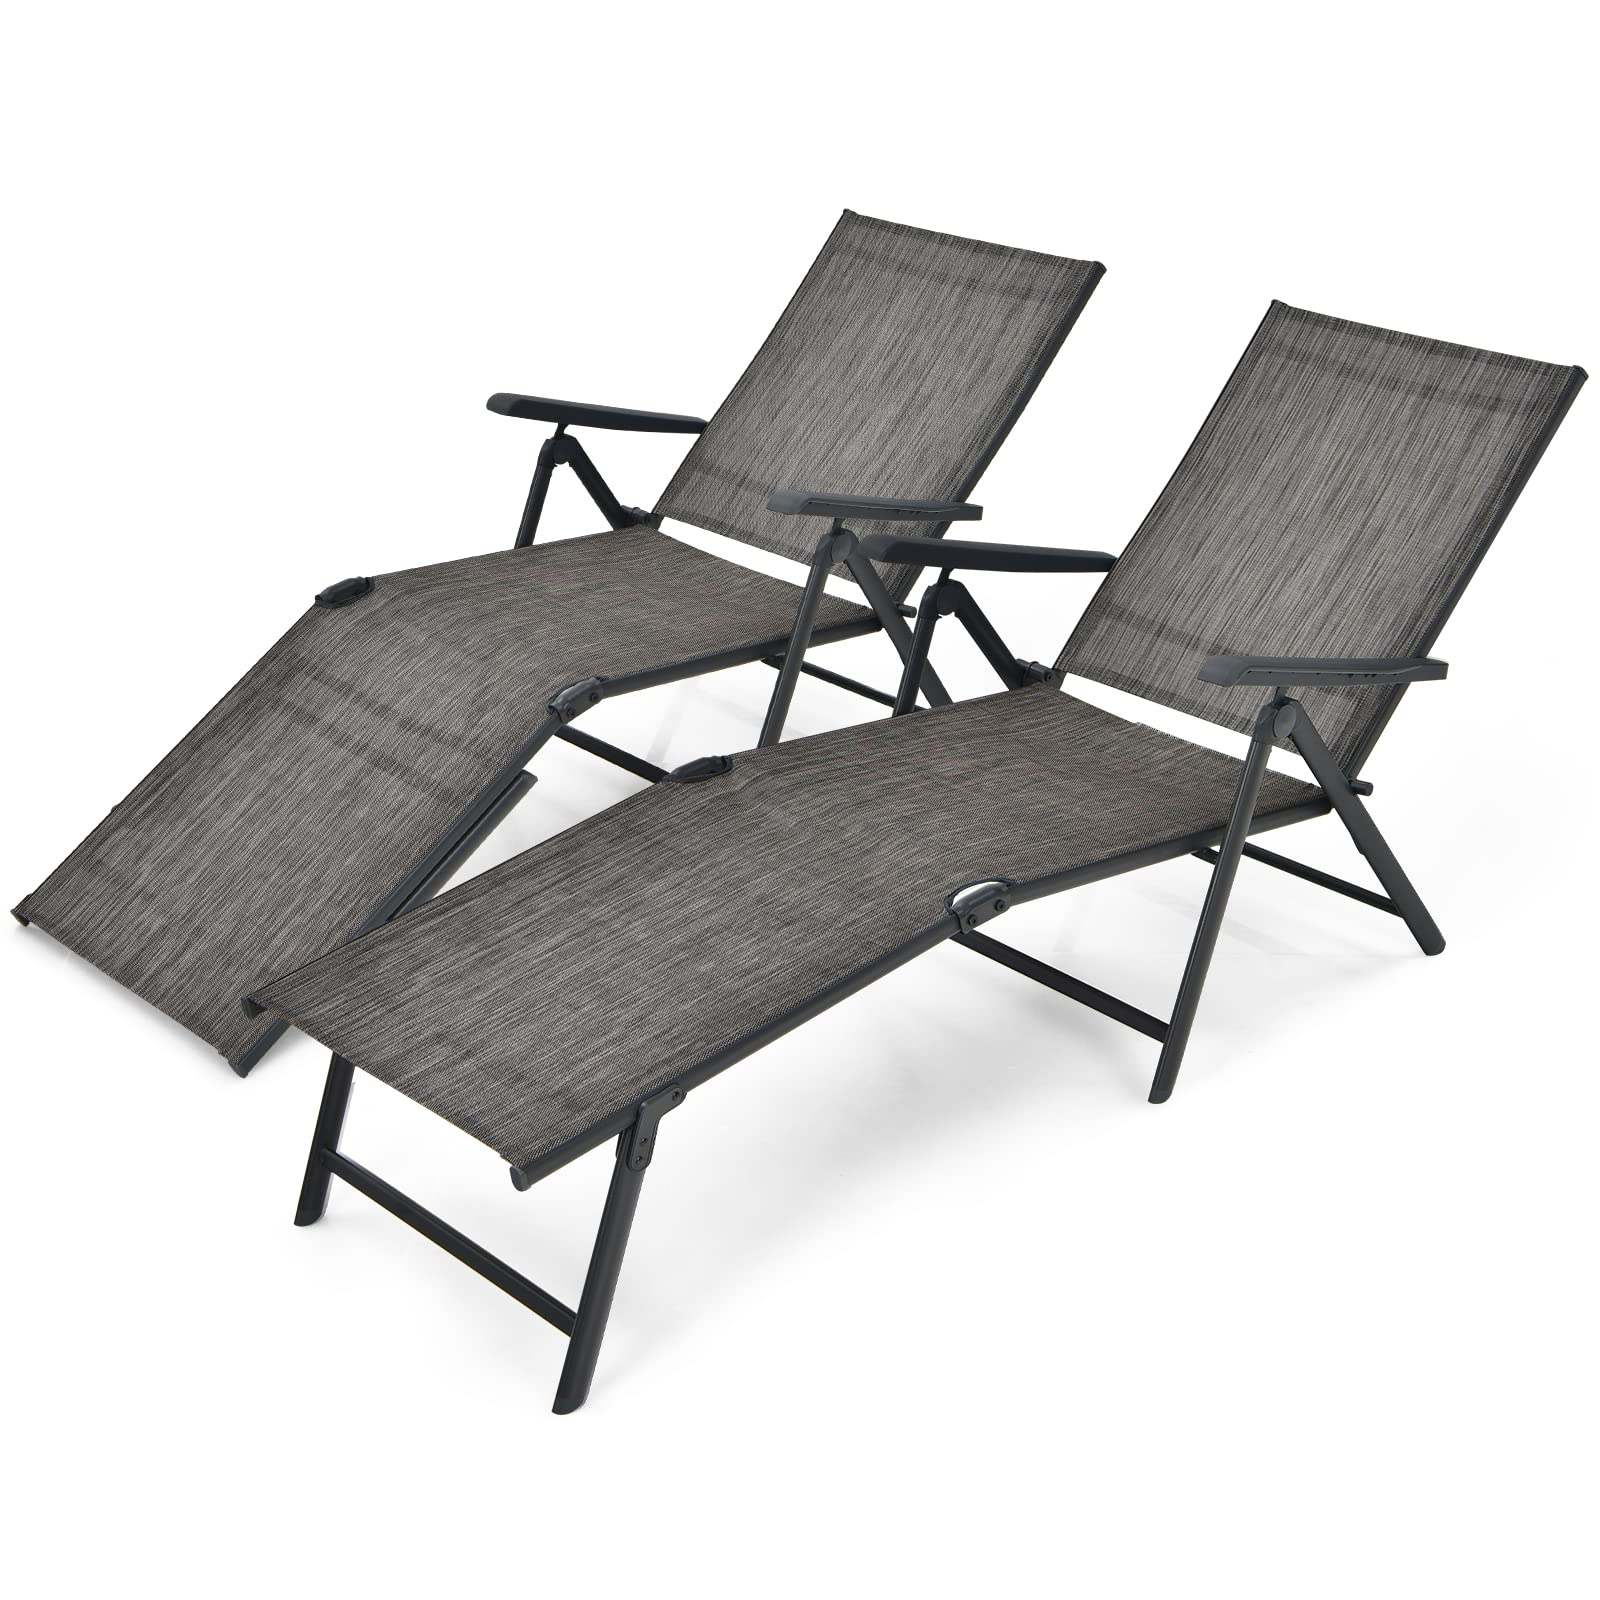 Outdoor Sunbathing Chair W/ 5-Position Backrest | Patio Lounge Chair